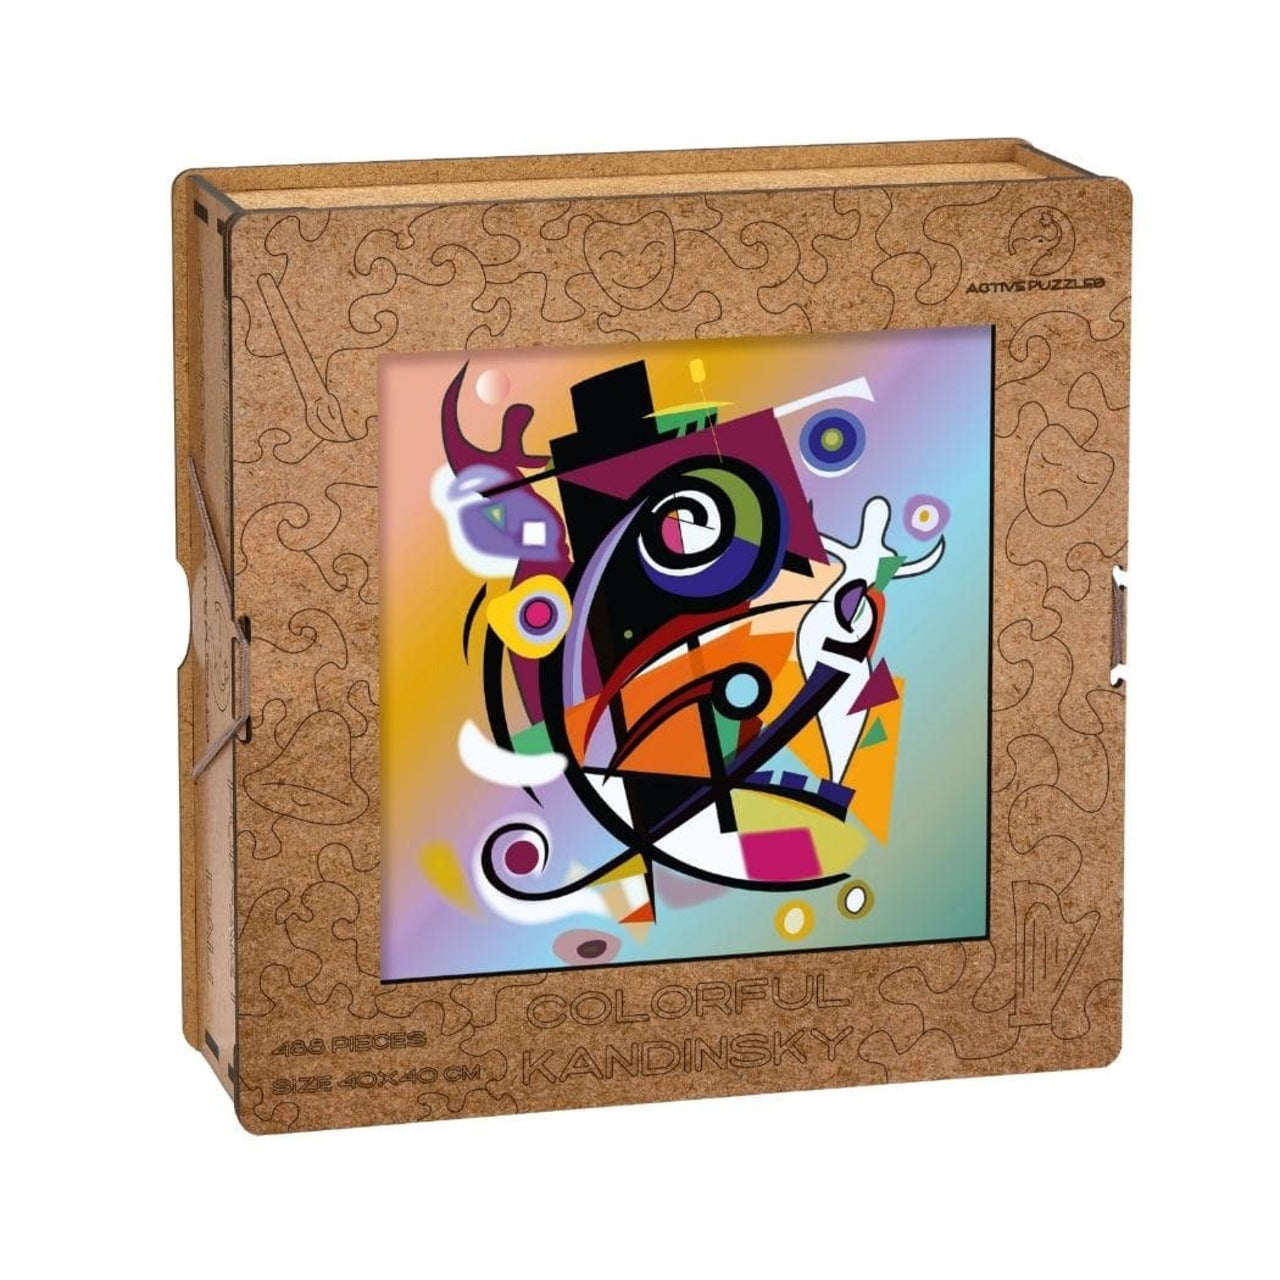 Kandinsky Wooden Puzzle 40 x 40 boxing view